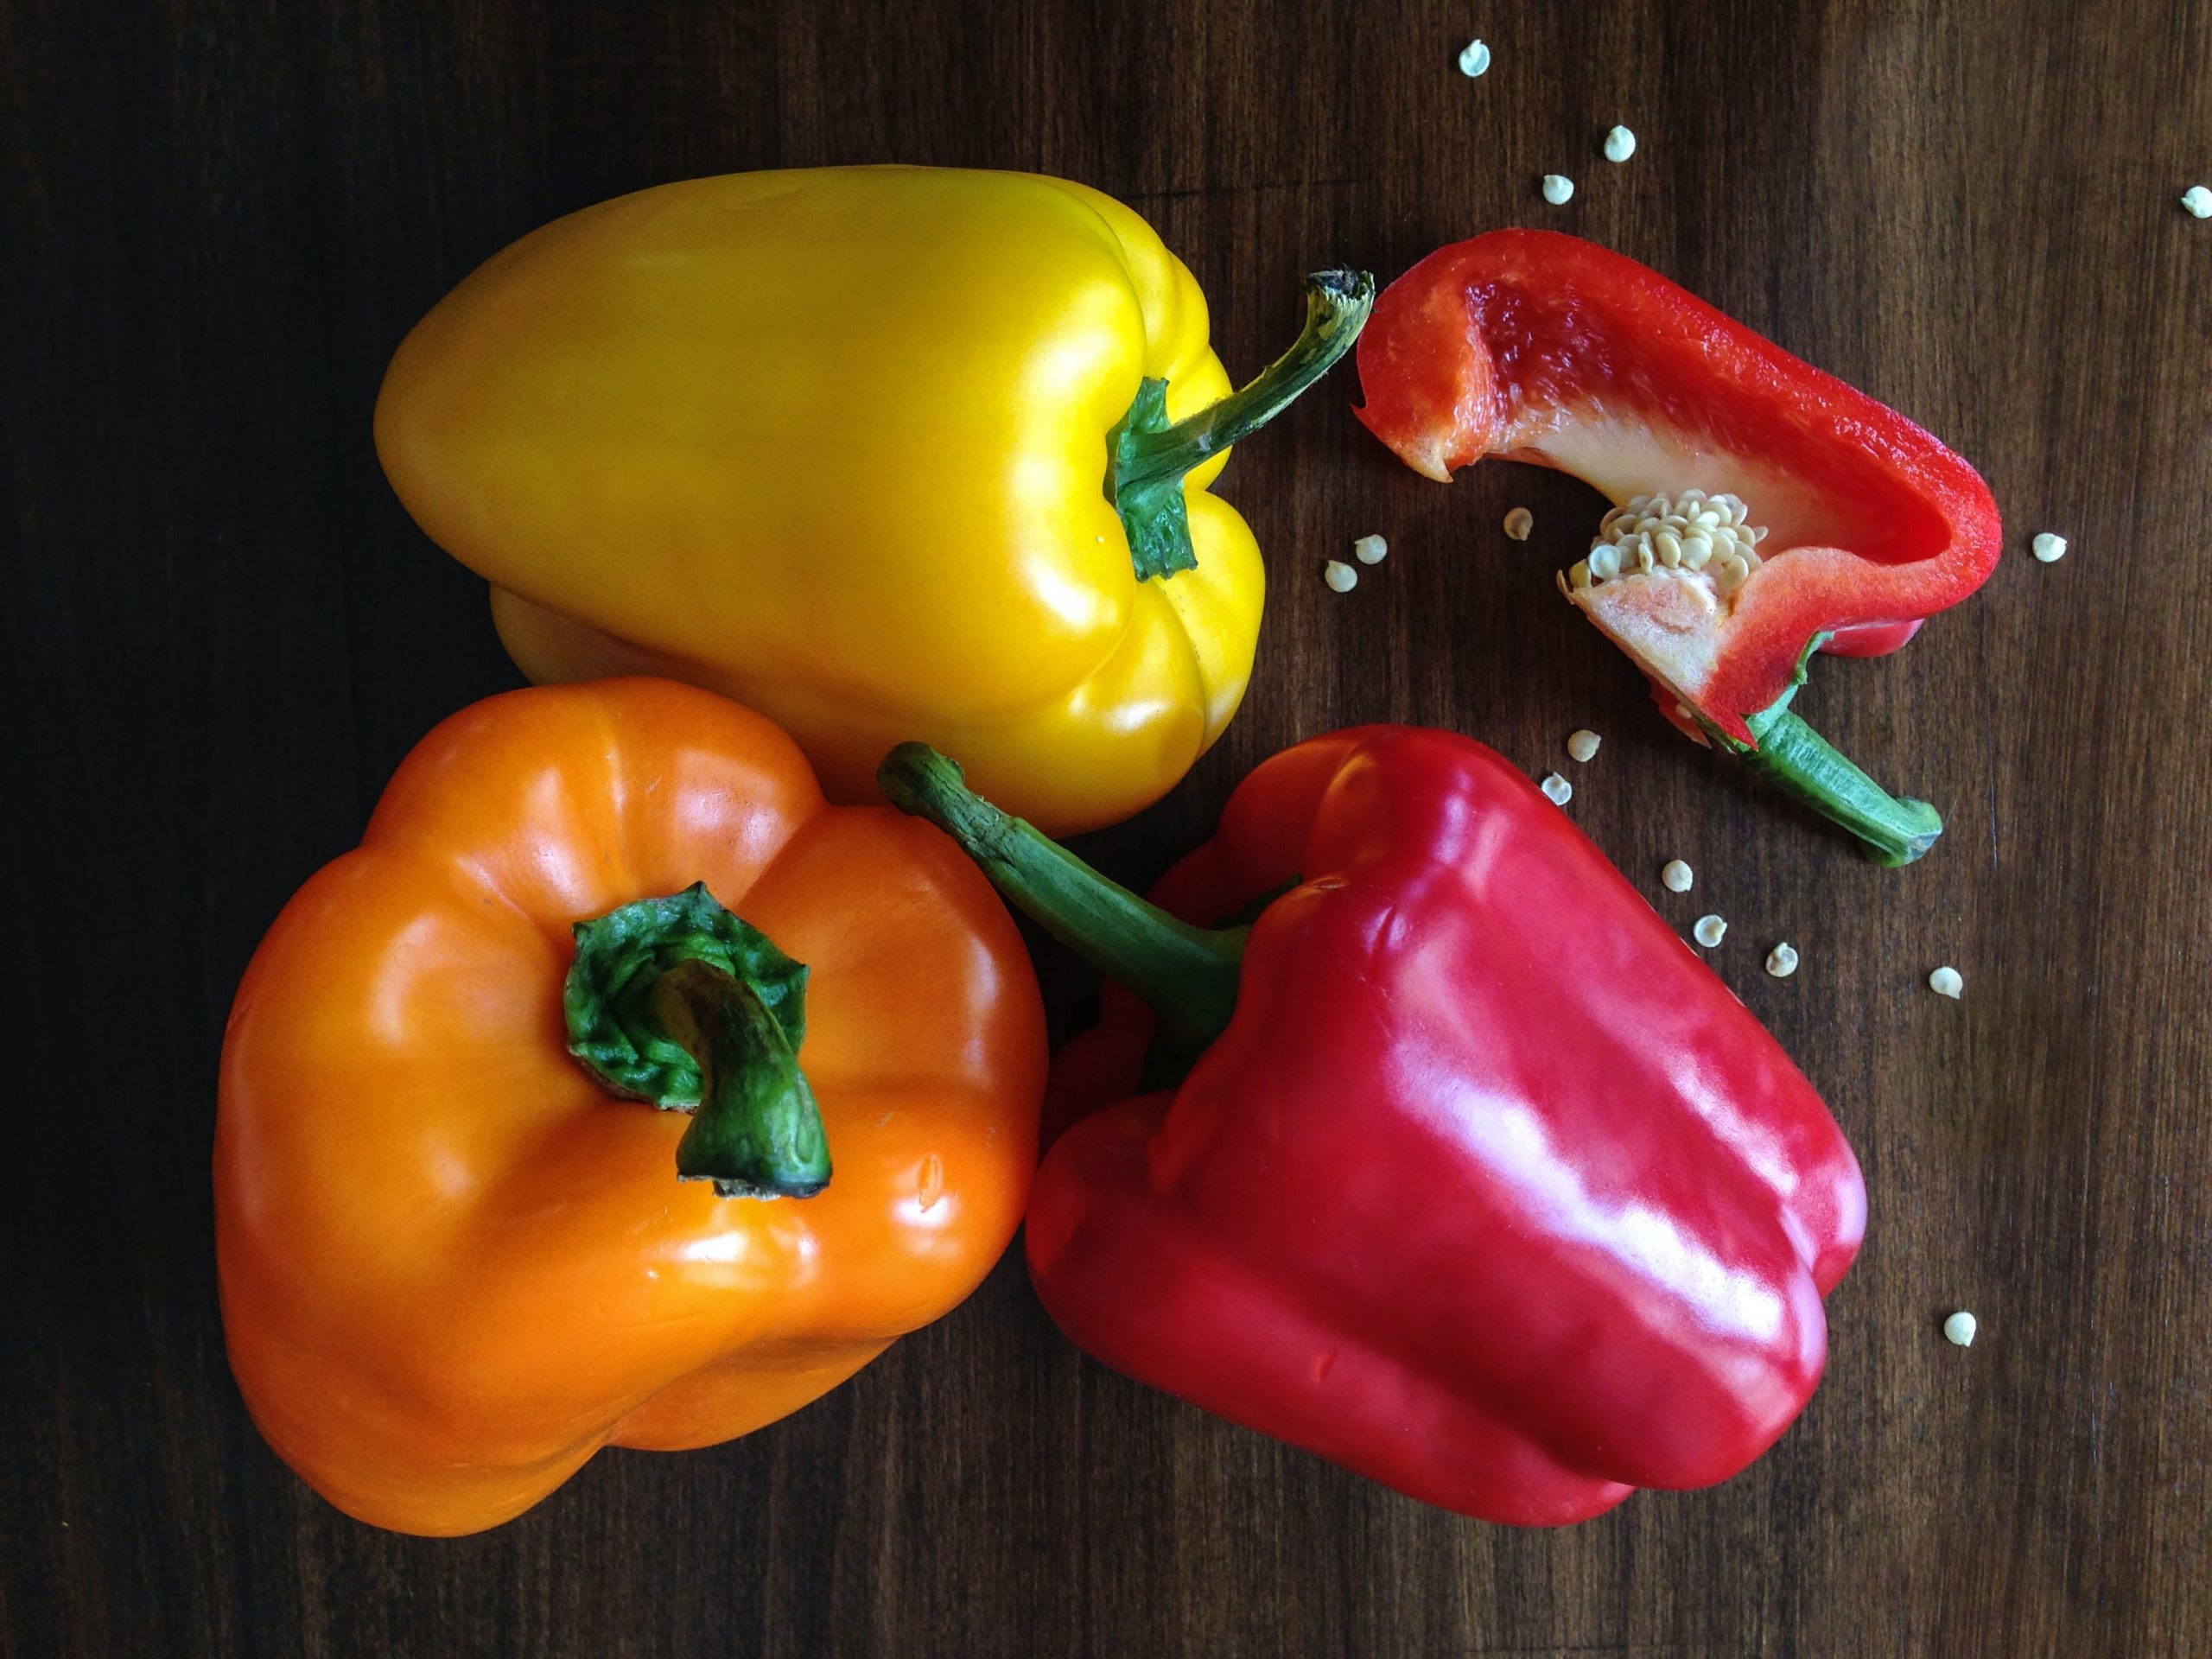 red, yellow and orange peppers